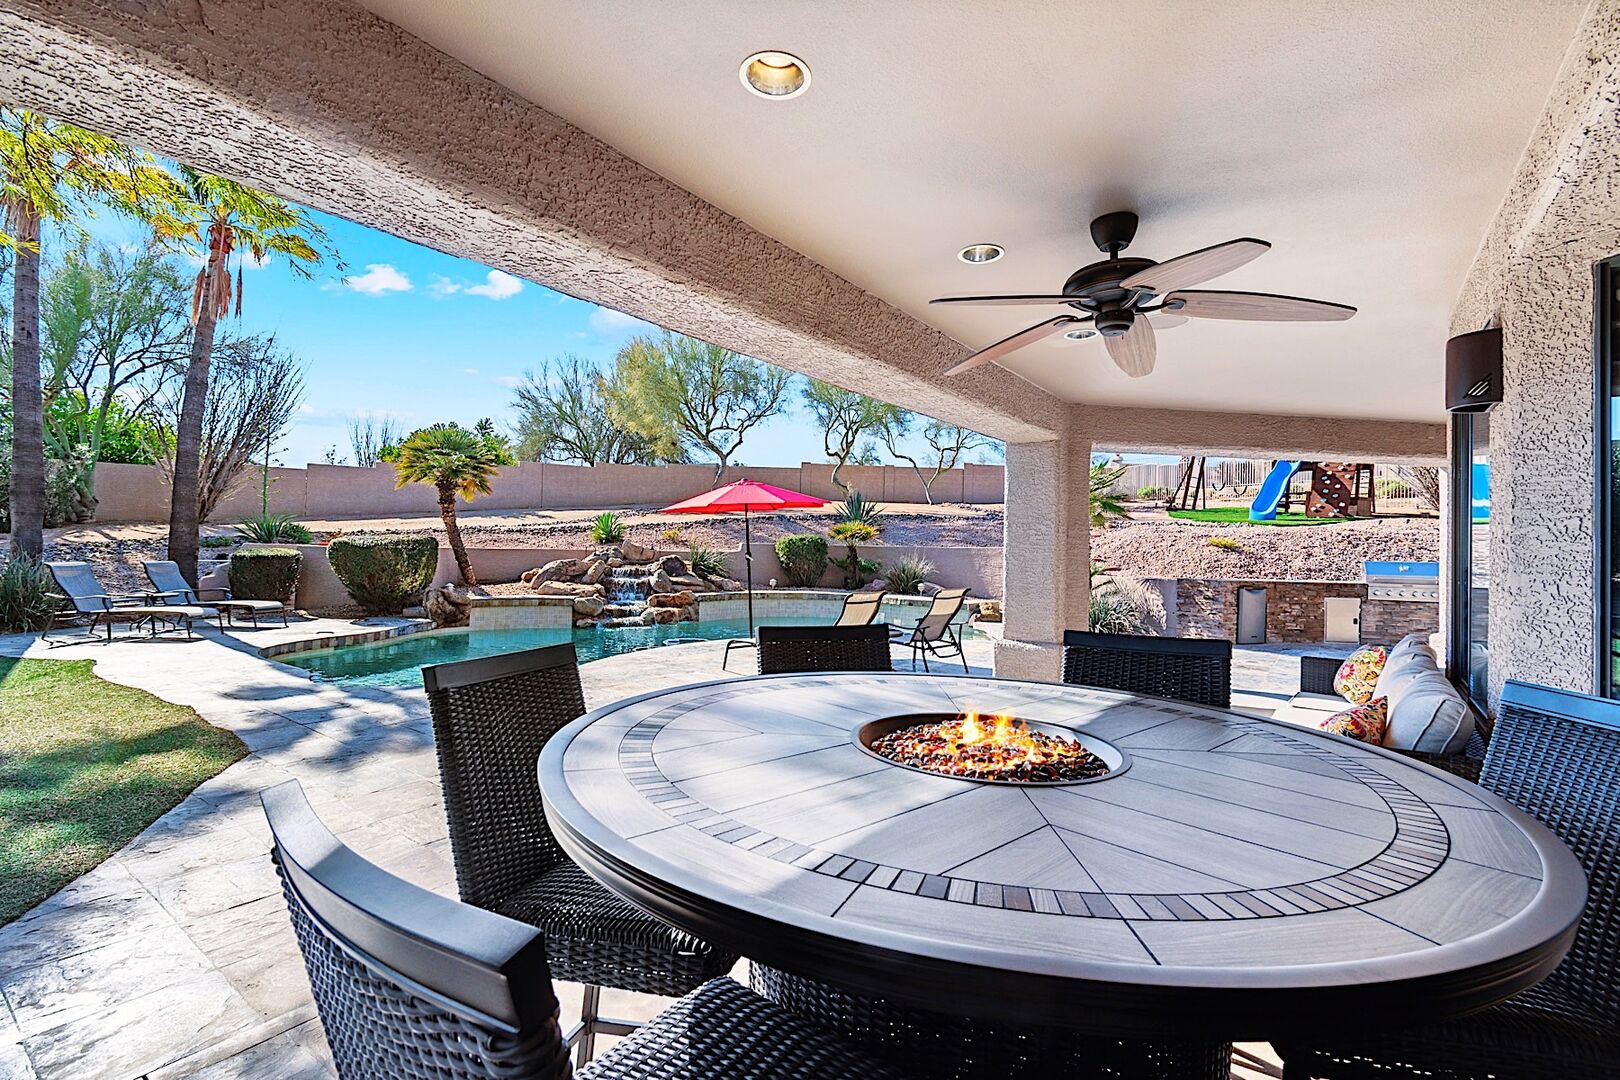 Fire pit outdoor dining table